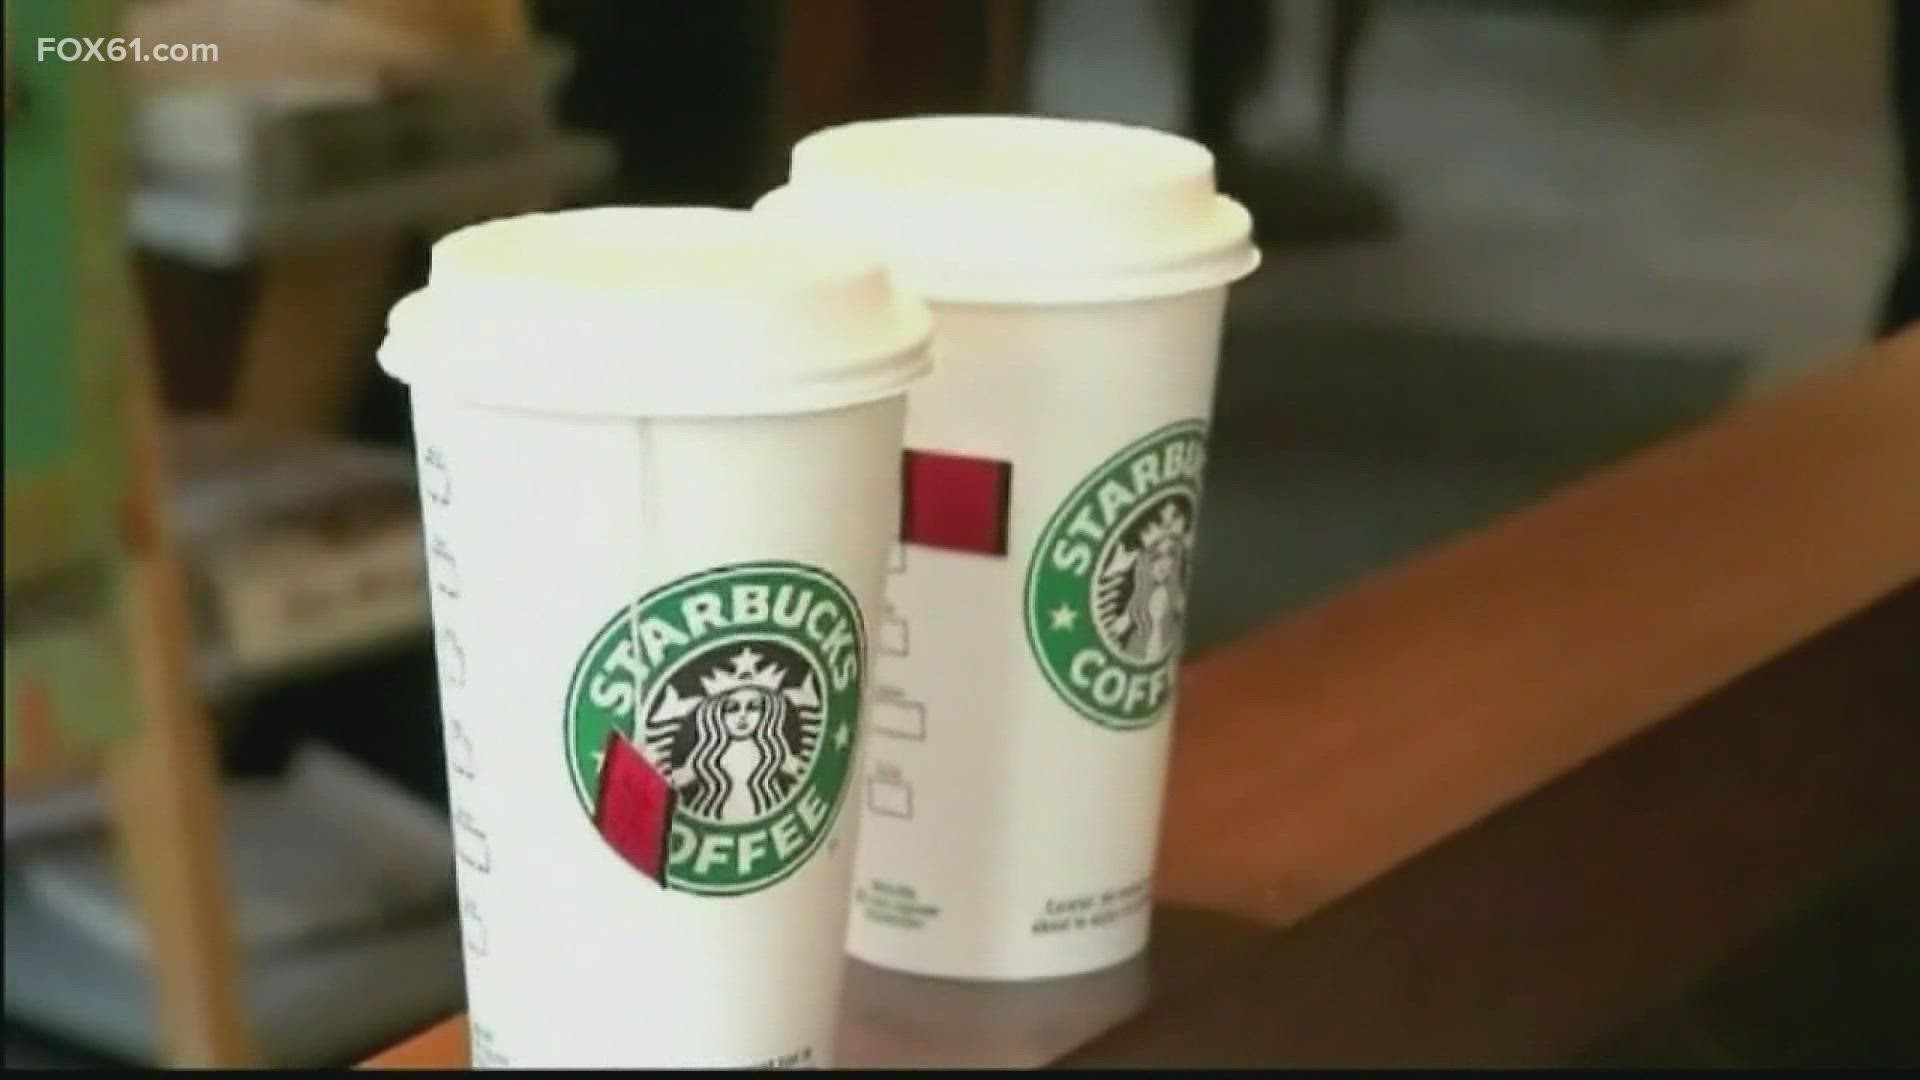 He opened the lid and saw a blue chemical solution, which Starbucks later determined to be a cleaner for coffee machines, according to the lawsuit.